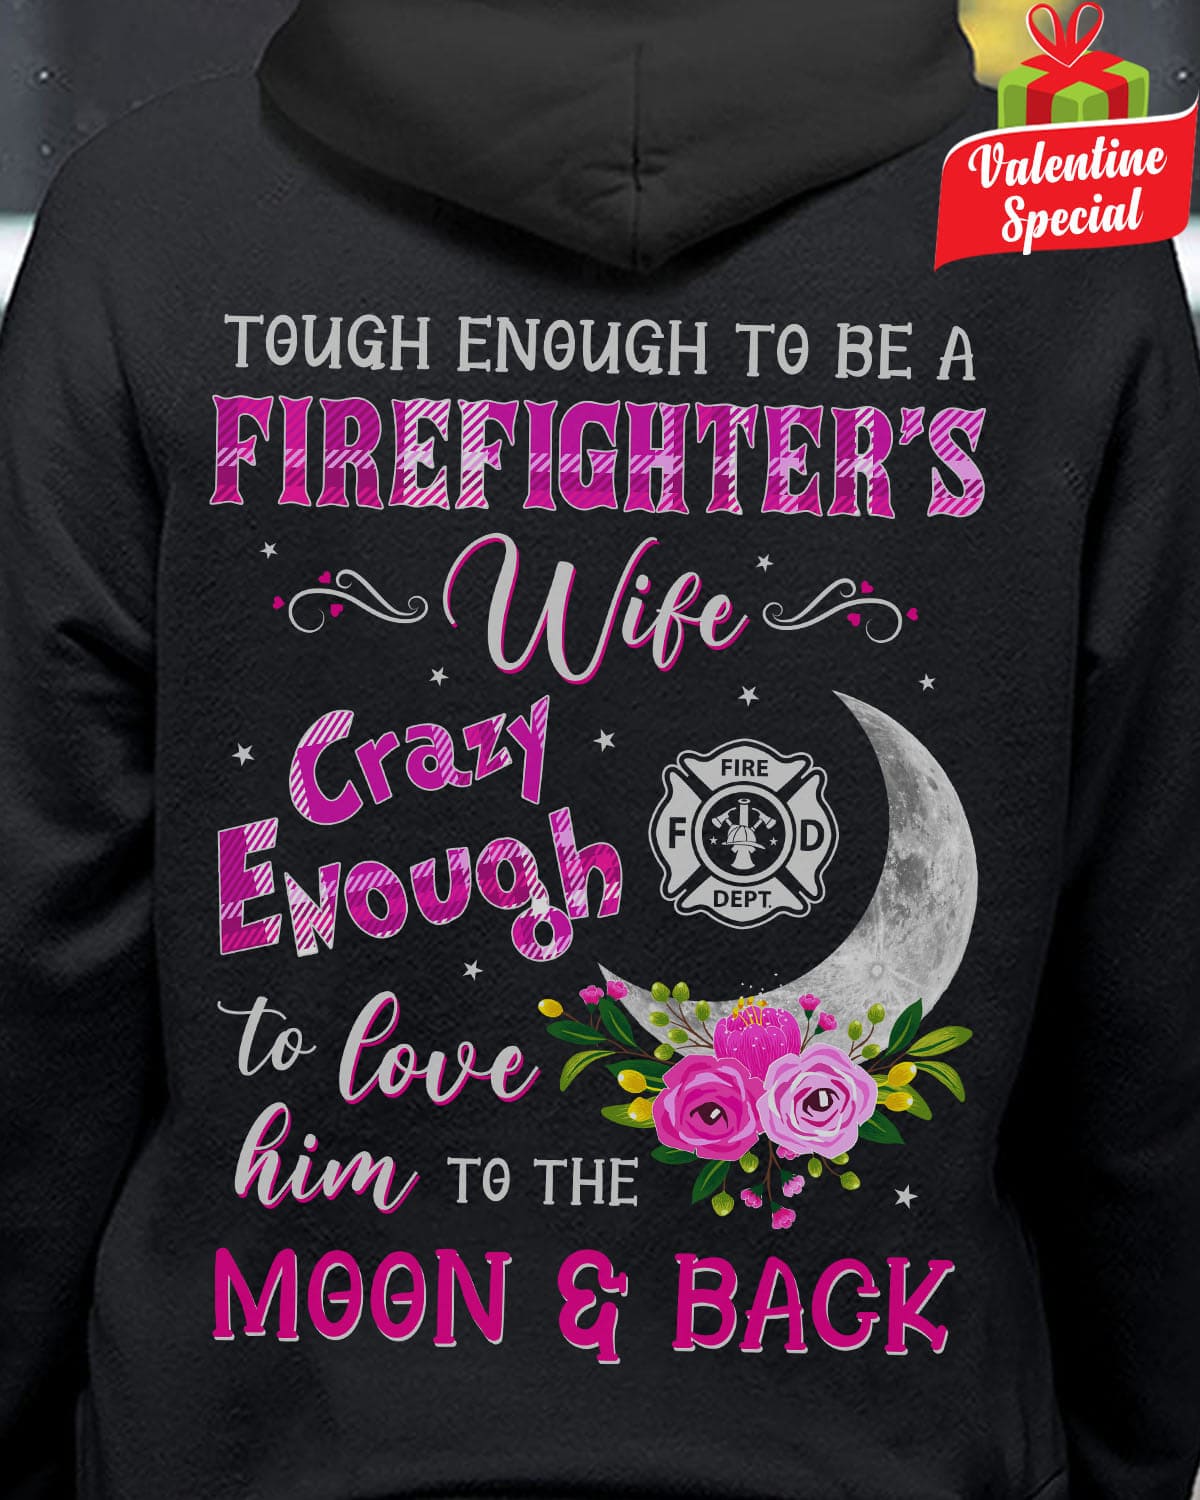 Tough enough to be a firefighter's wife crazy enough to love him to the moon and back